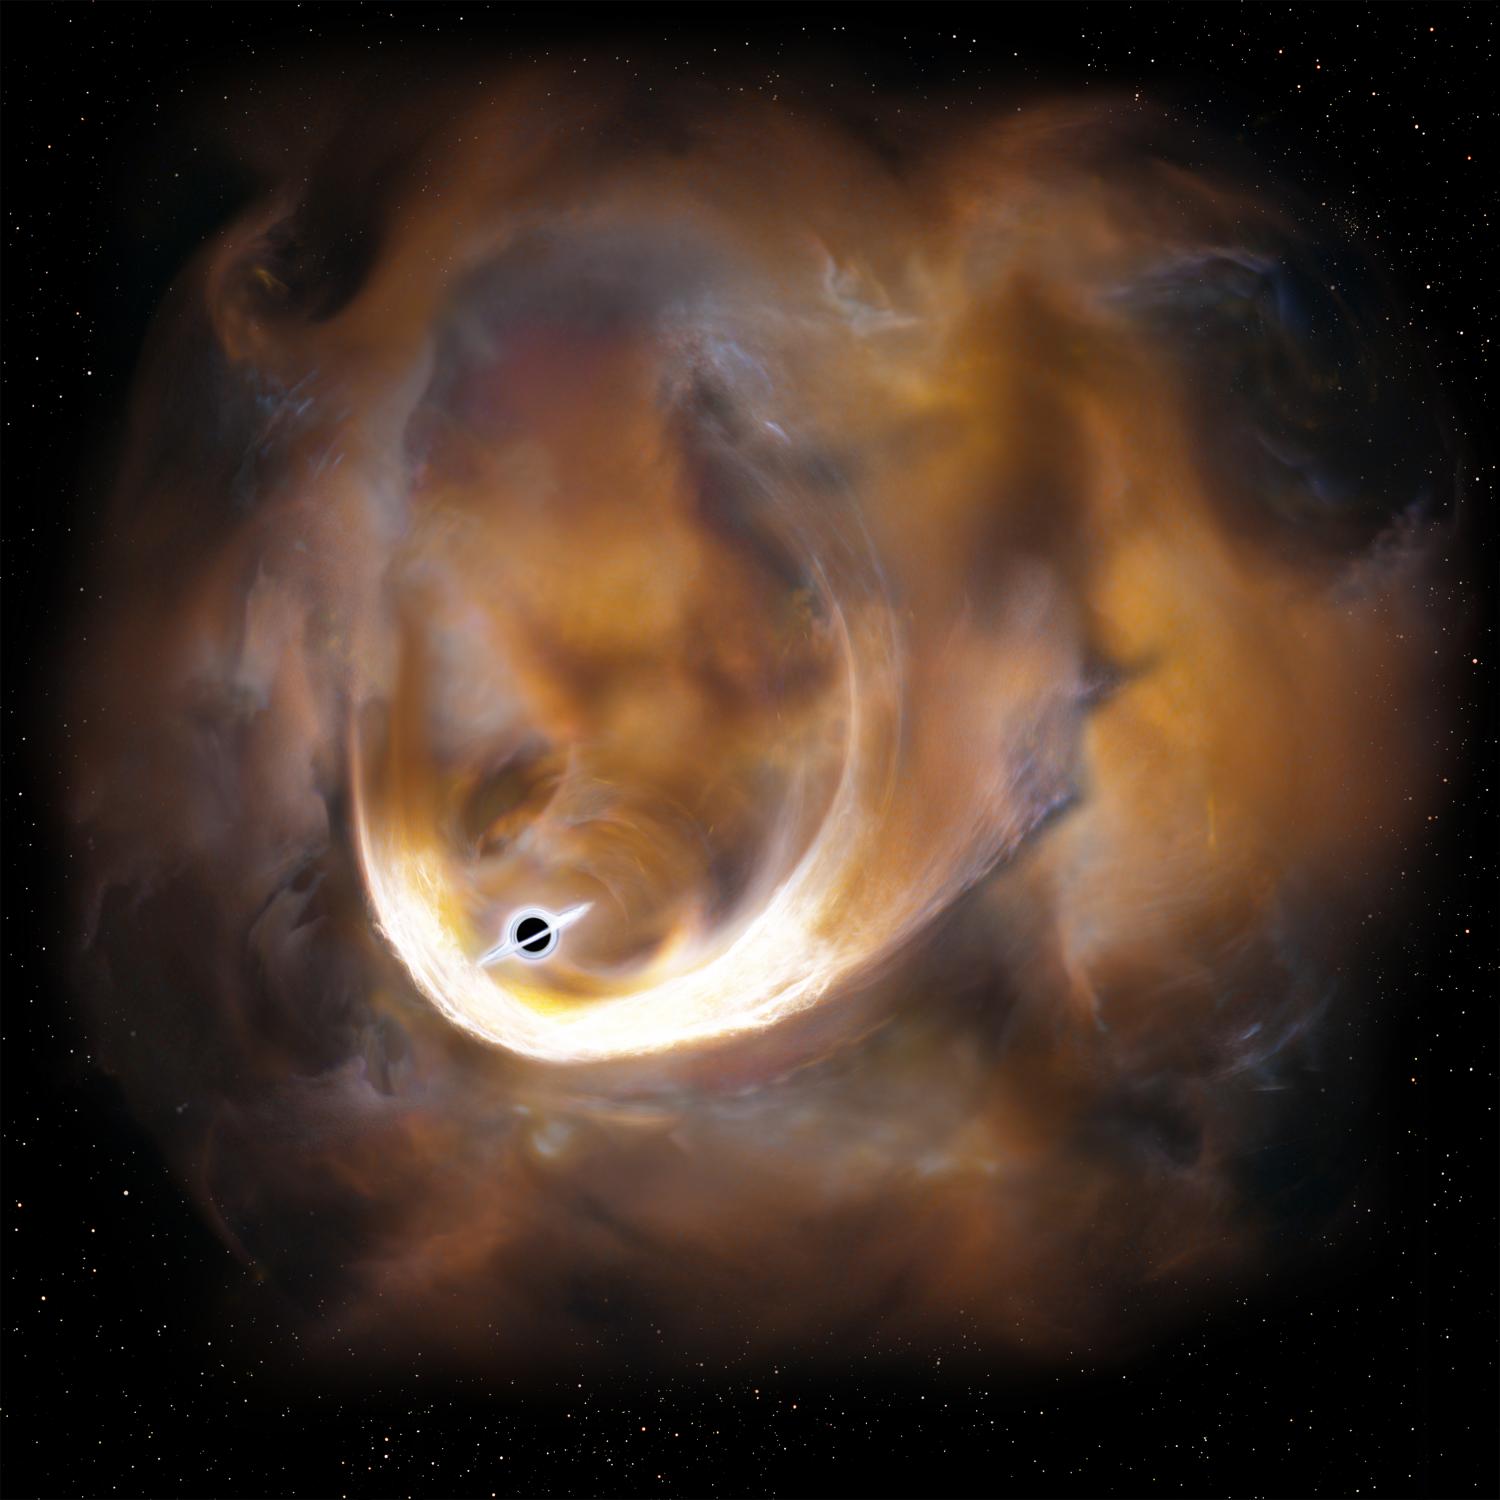 Could this be the second largest black hole in the Milky Way?